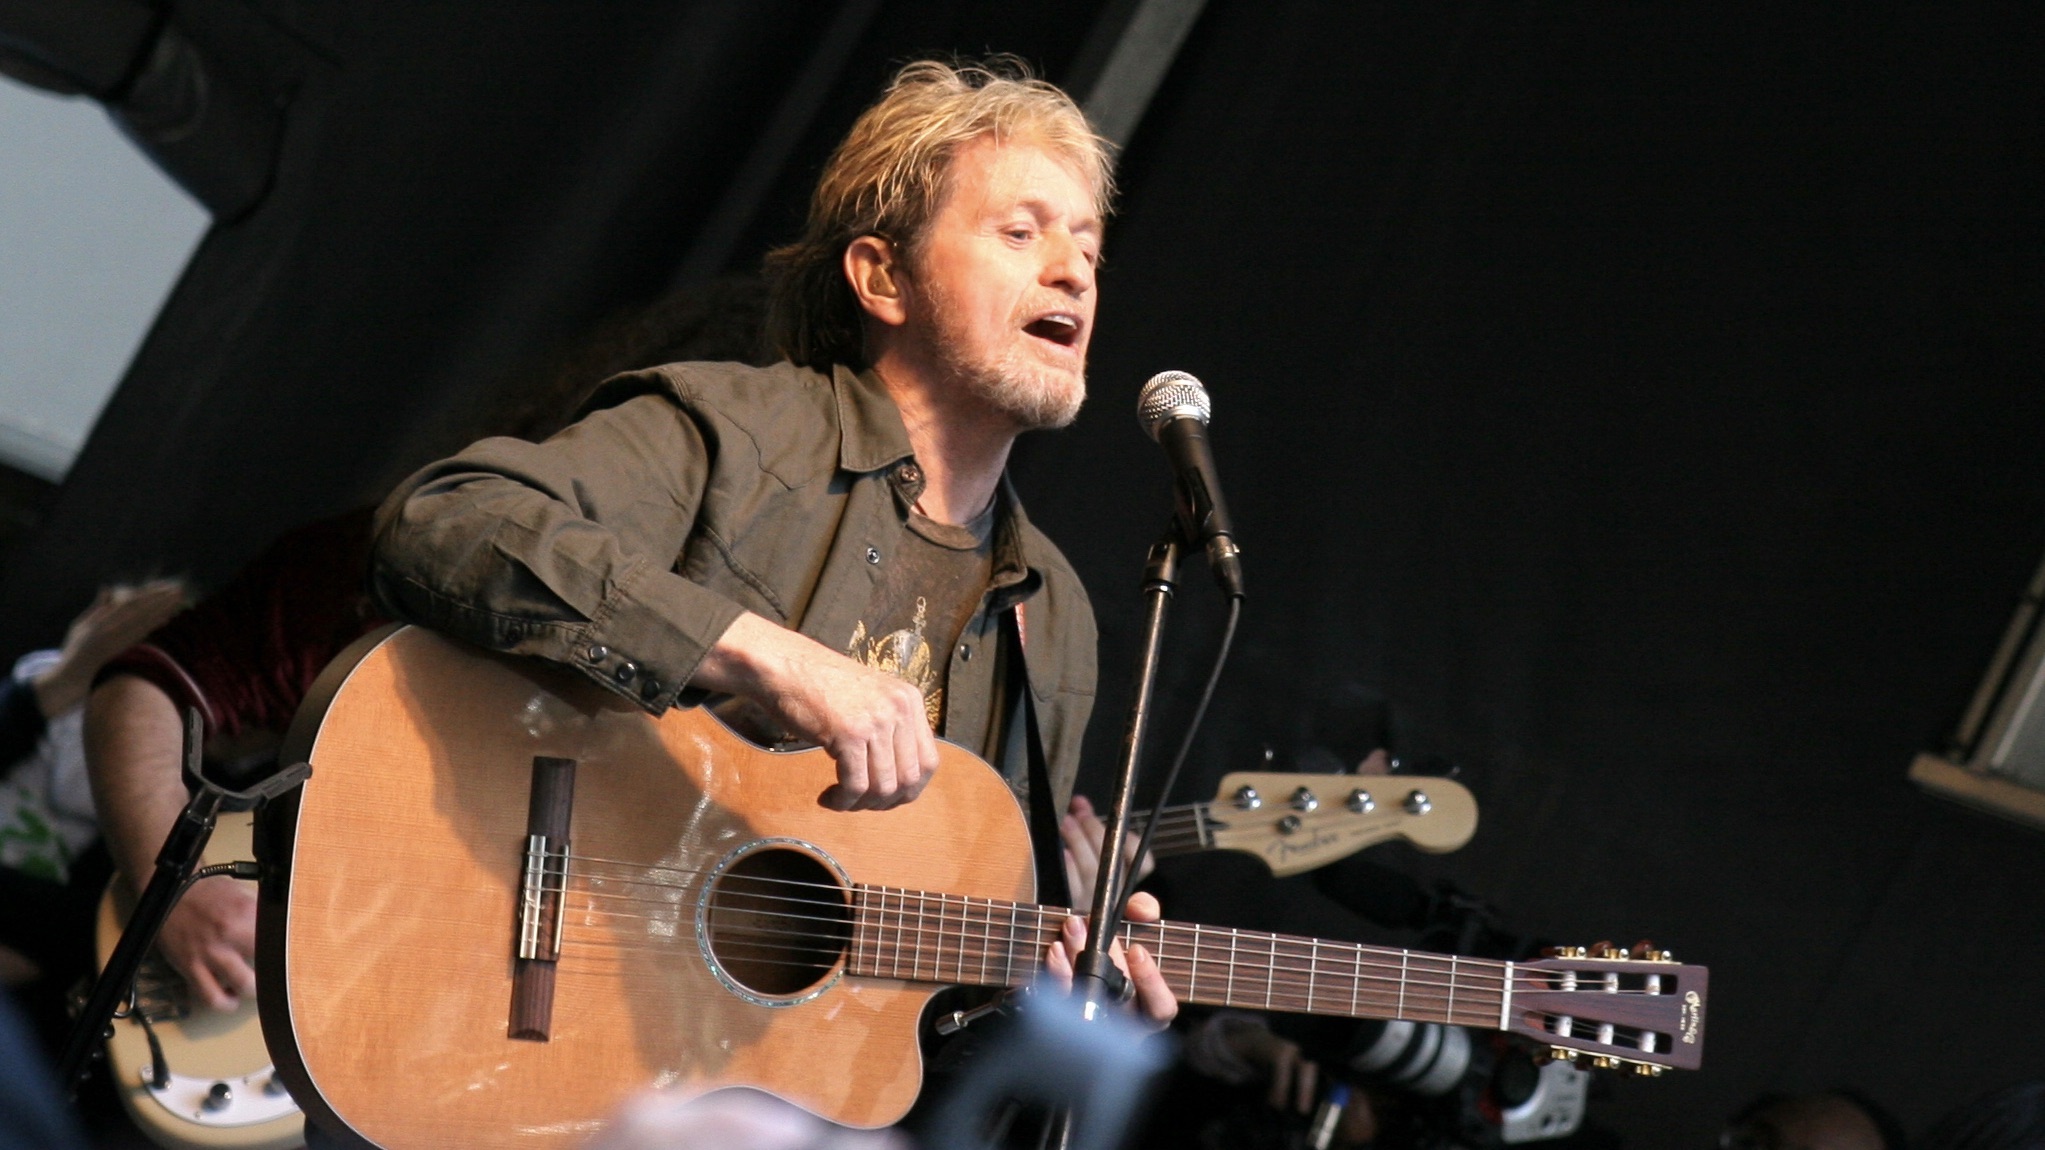 Jon Anderson sings and plays guitar on stage.